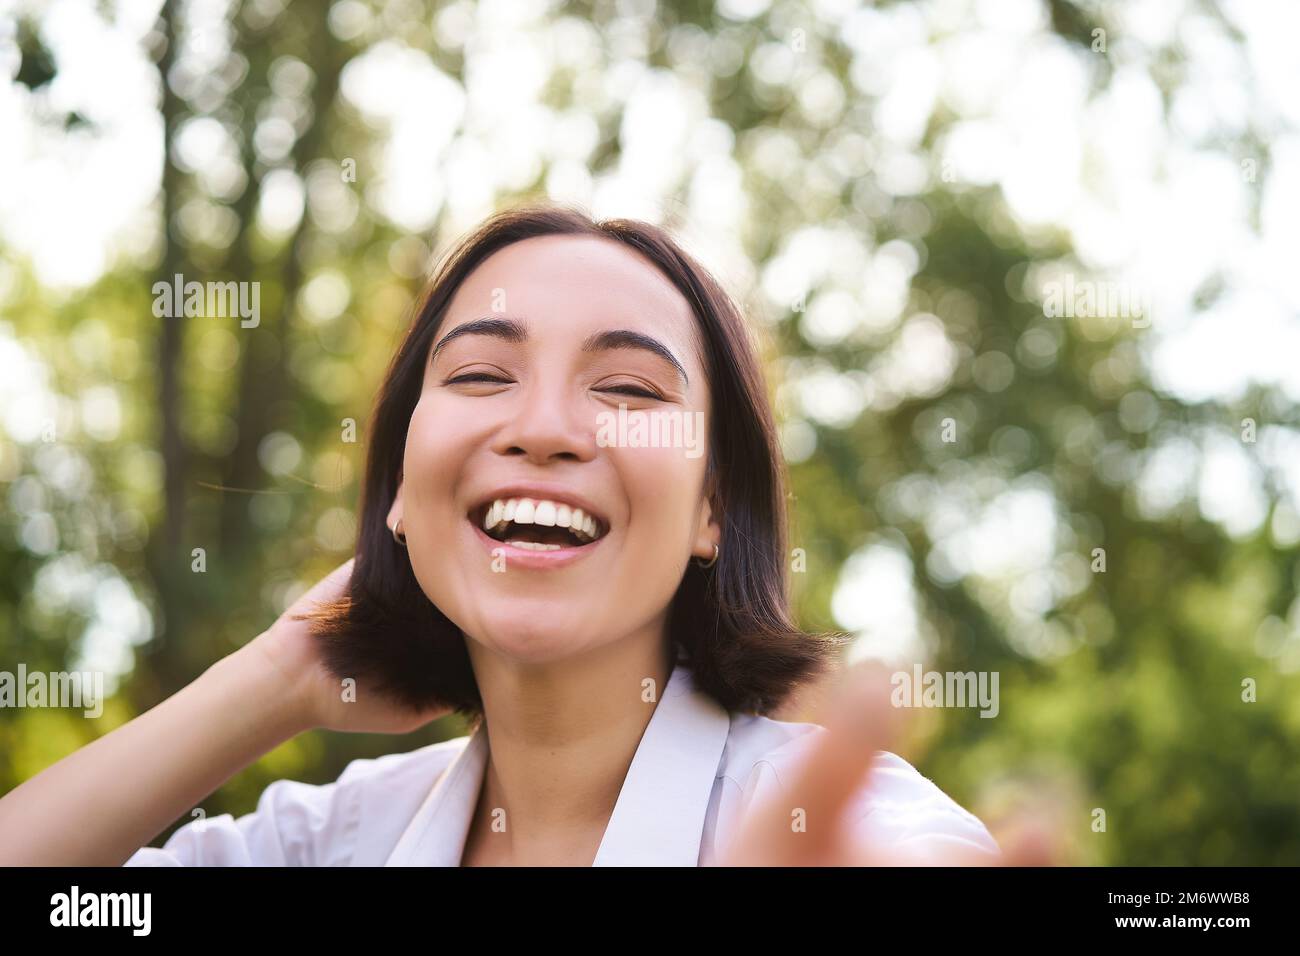 Genuine people. Portrait of asian woman laughing and smiling, walking in park, feeling joy and positivity Stock Photo